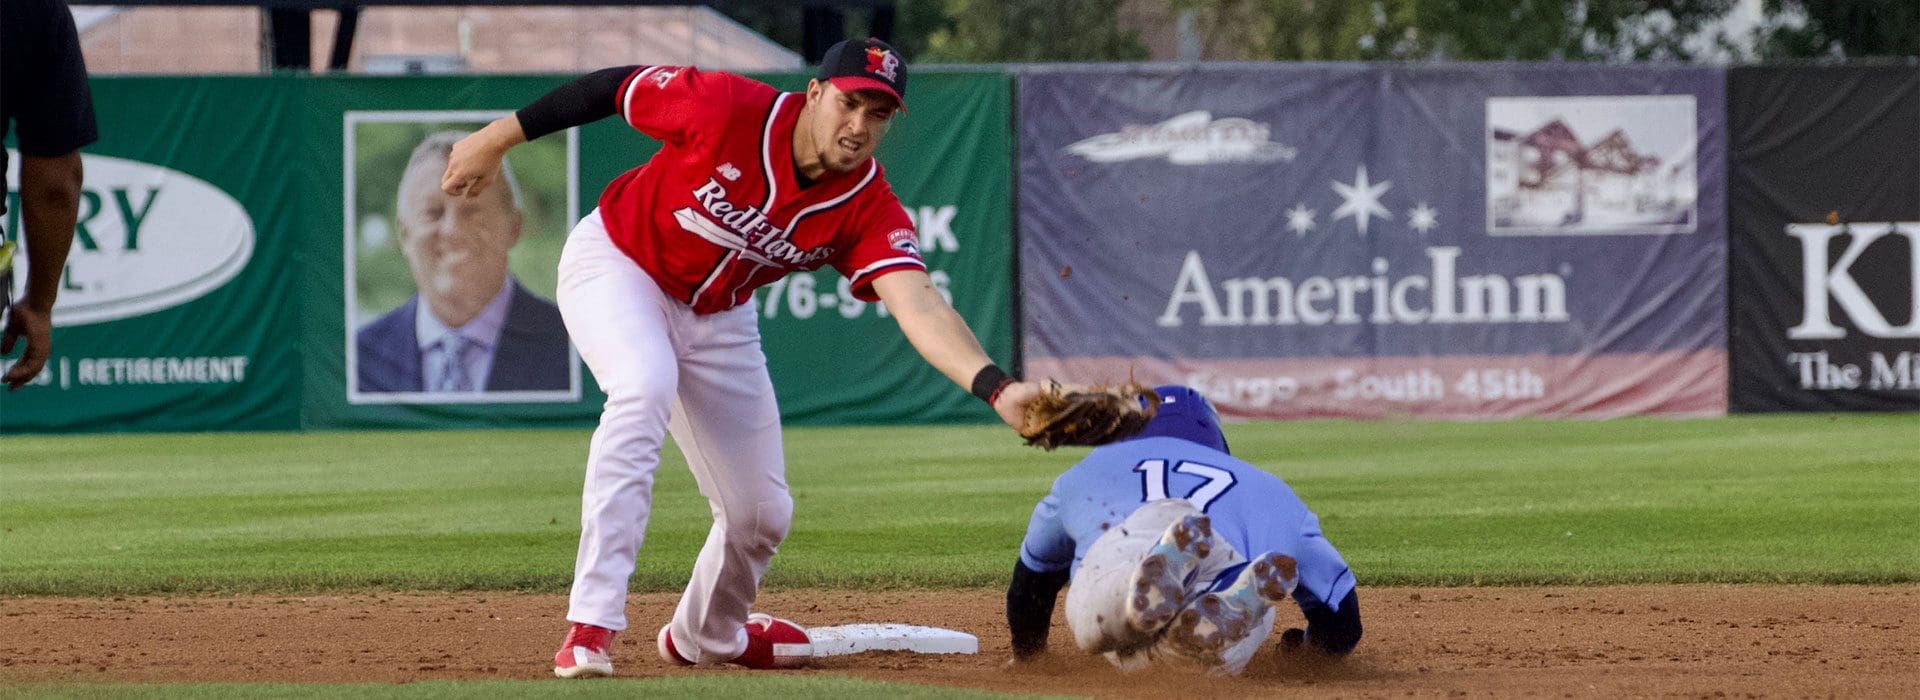 Thomas Jones slides under the attempted tag of the Fargo Shortstop